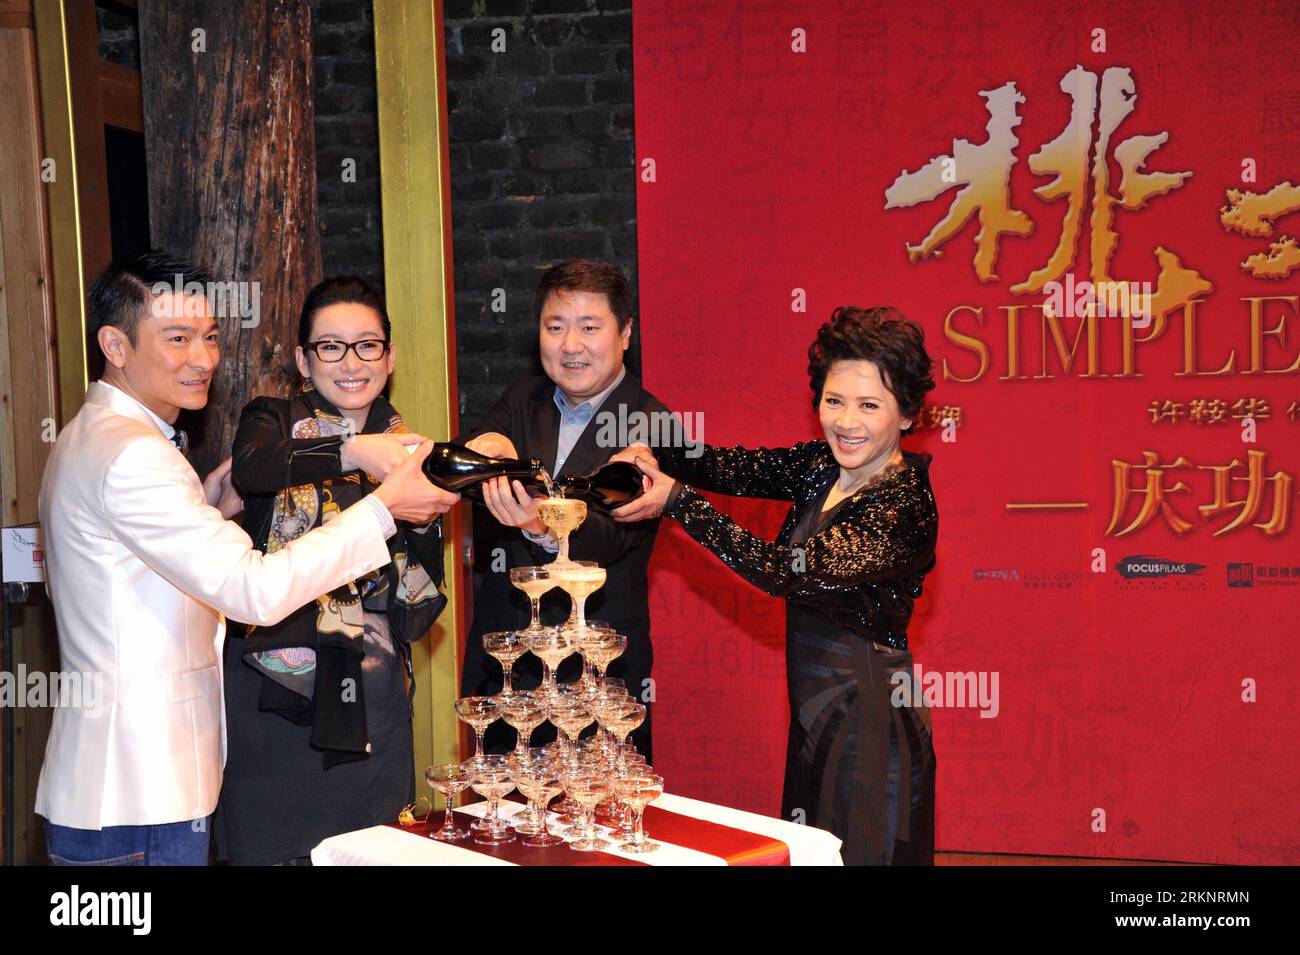 Bildnummer: 57443310  Datum: 15.03.2012  Copyright: imago/Xinhua (120315) -- BEIJING, March 15, 2012 (Xinhua) -- Actor Andy Lau actress Qin Hailu, actor Yu Dong and actress Deannie Yip (from L to R) pose a victory meeting of the film A Simple Life in Beijing, capital of China, March 15, 2012. A victory meeting for the film A Simple Life was held Thursday in Beijing to celebrate its excellent box office which topped 70 million yuan (about 11.06 million U.S. dollars) since its release on March 8. (Xinhua)(mcg) CHINA-BEIJING-FILM A SIMPLE LIFE -CELEBRATION (CN) PUBLICATIONxNOTxINxCHN People Kultu Stock Photo